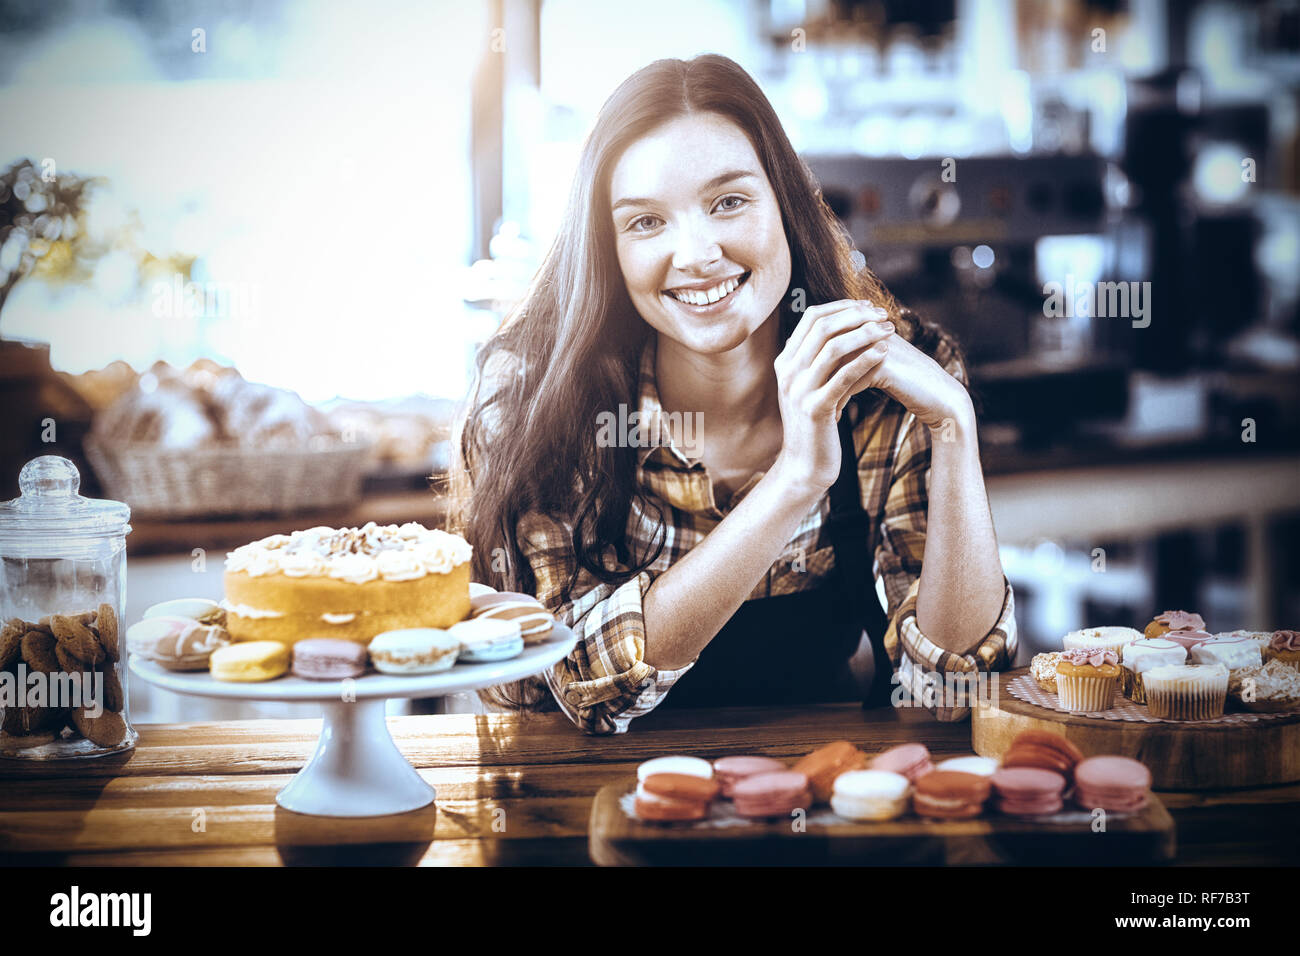 Portrait of waitress standing at counter with desserts Stock Photo